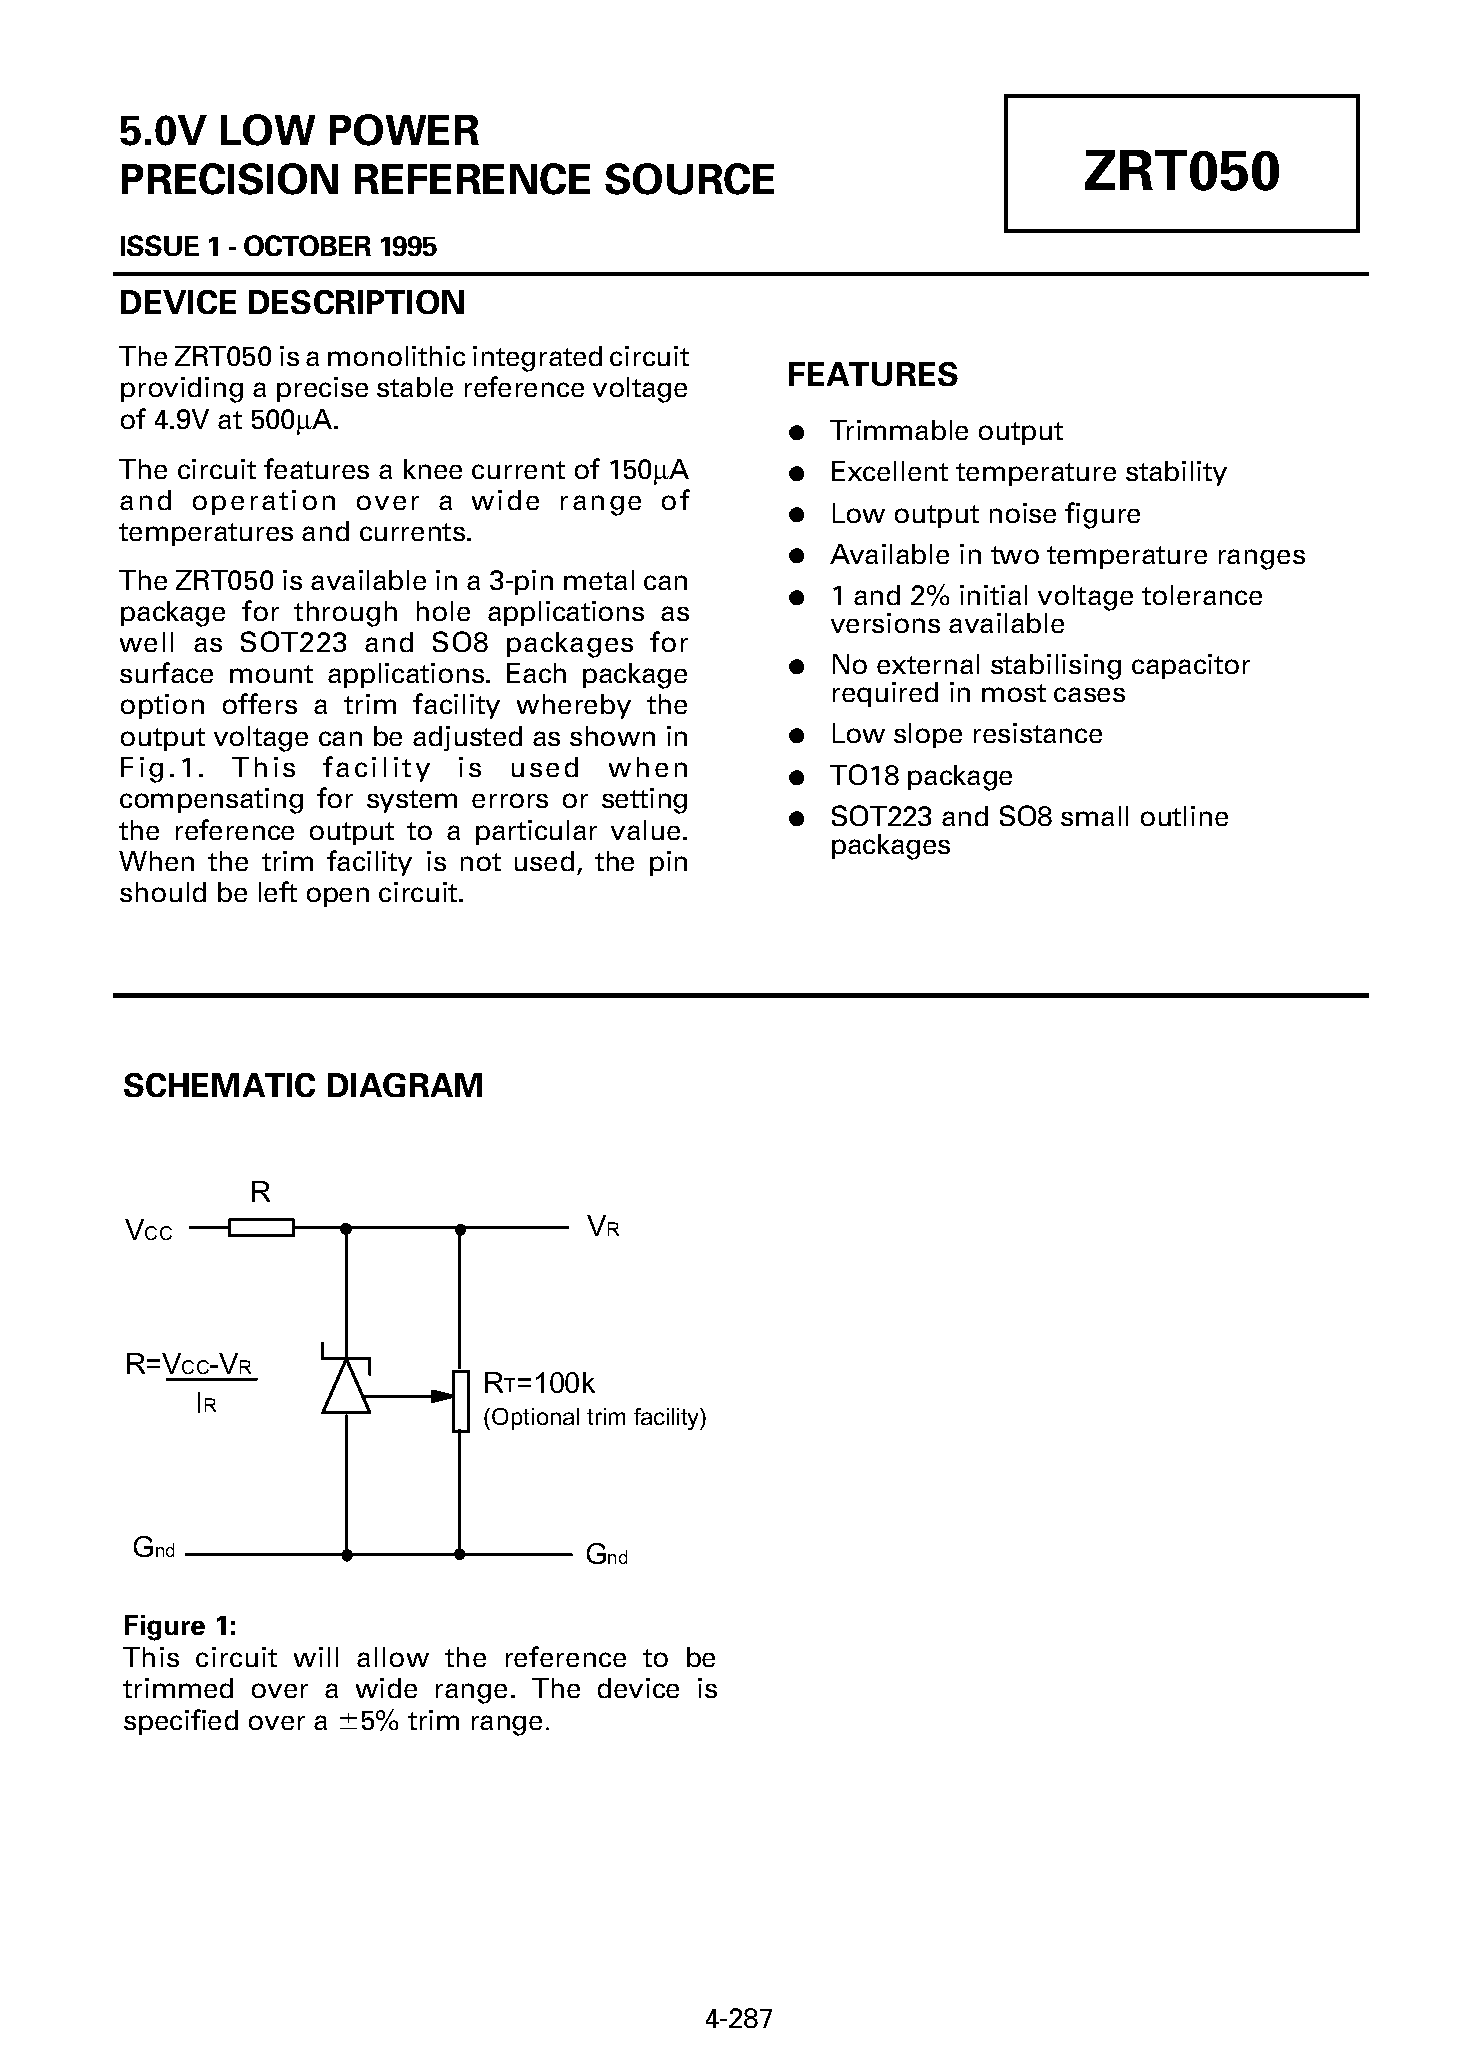 Datasheet ZRT050 - 5.0V LOW POWER PRECISION REFERENCE SOURCE page 1